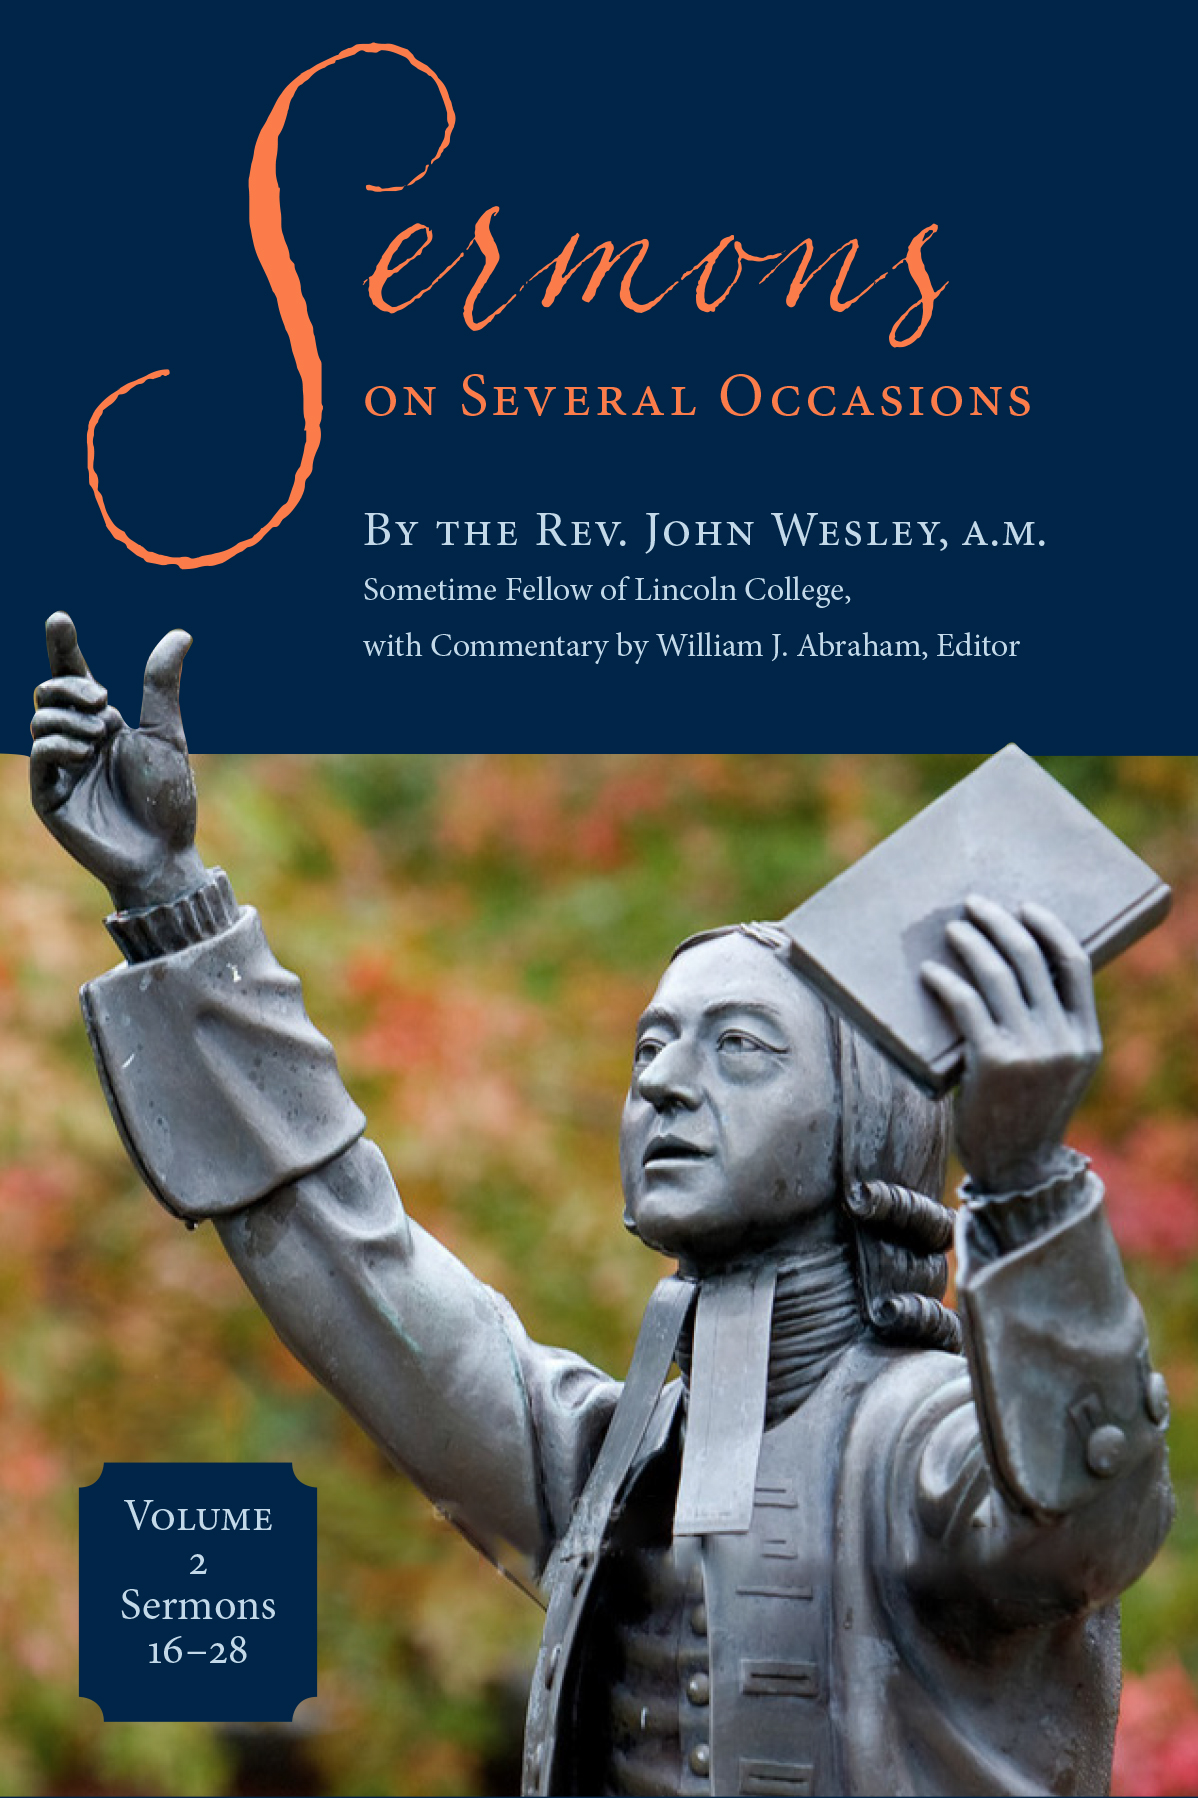 Sermons on Several Occasions, Vol. 2